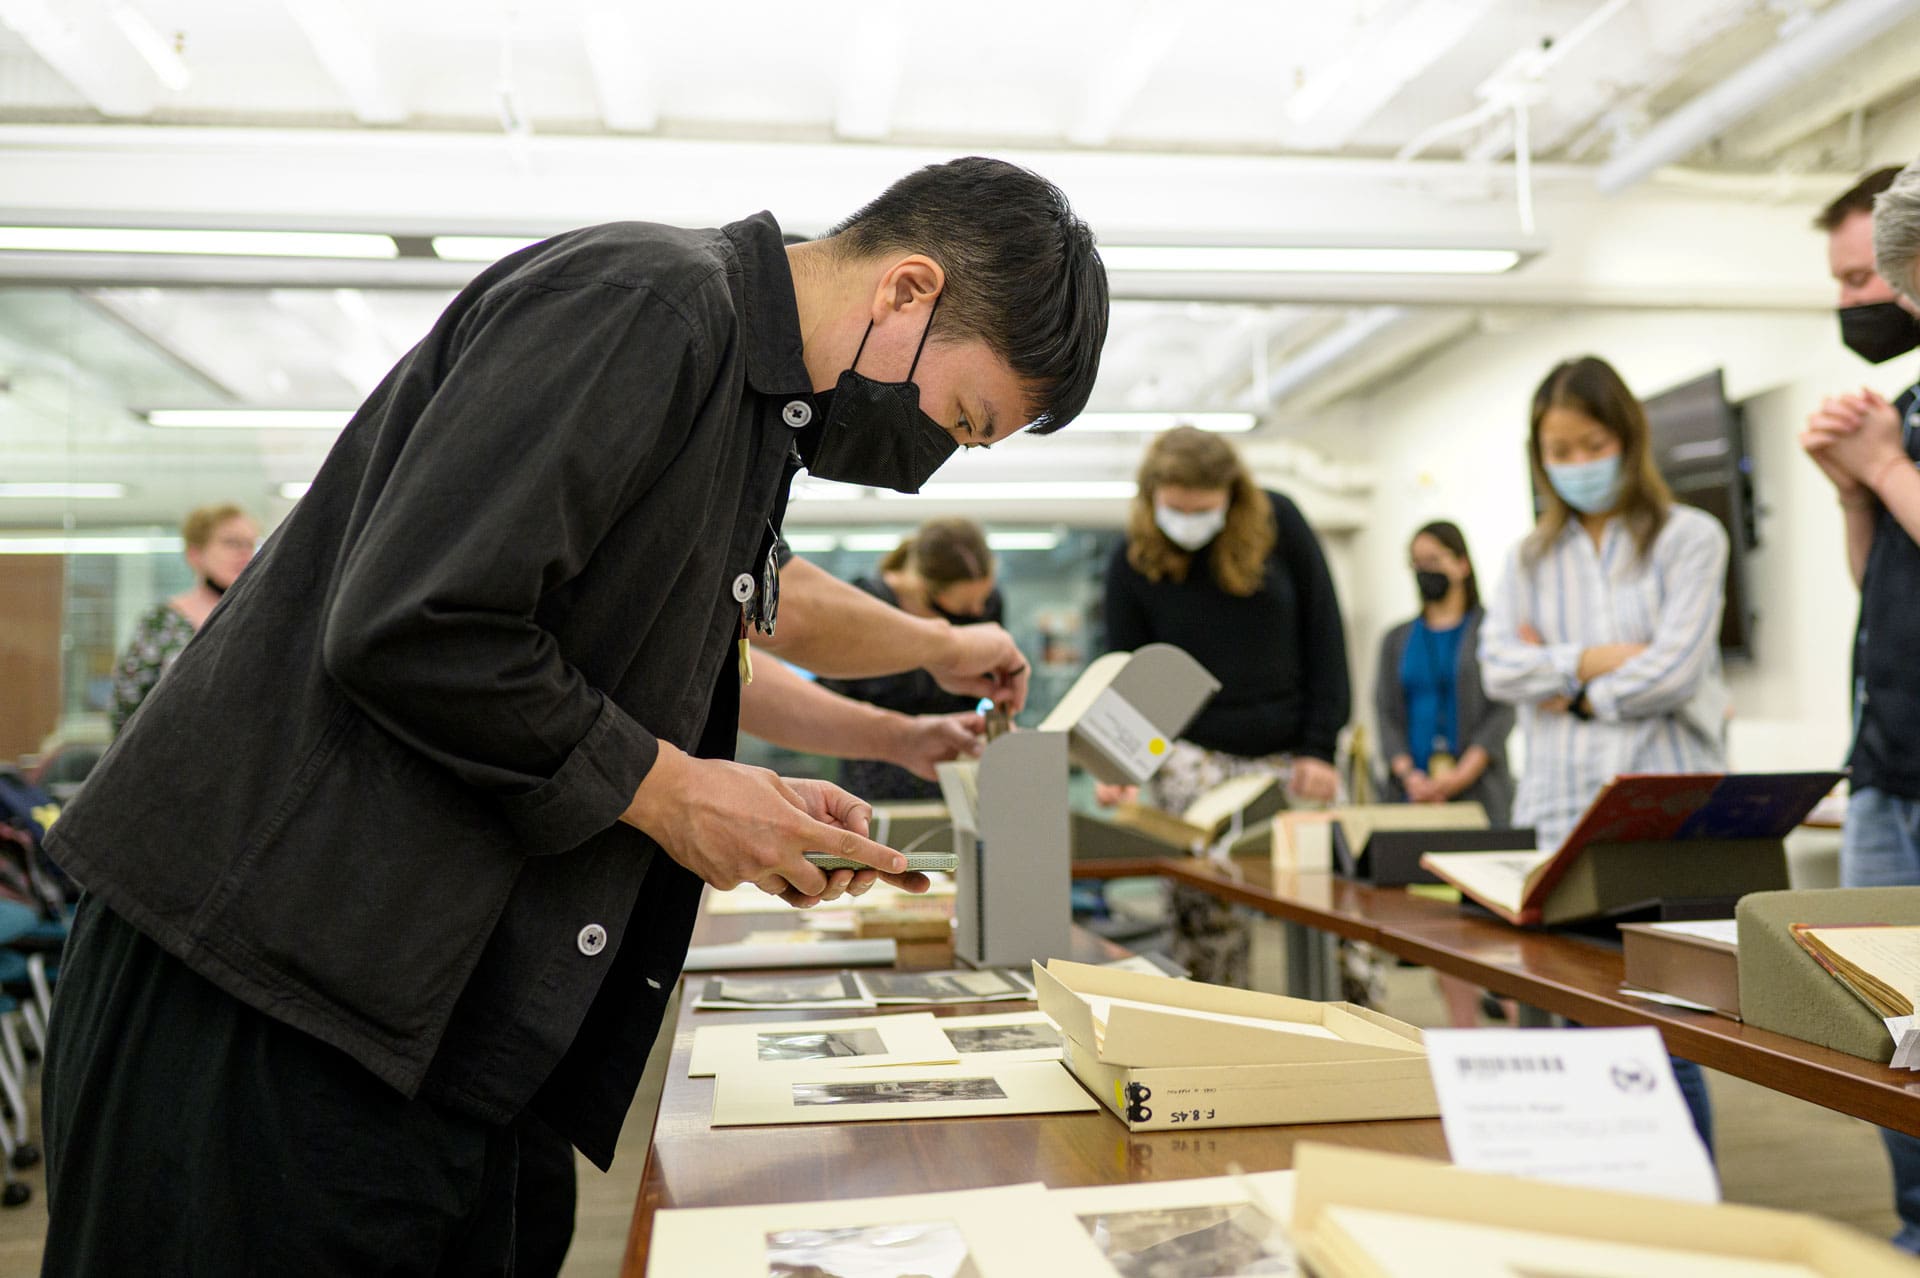 A person looking at archival materials.